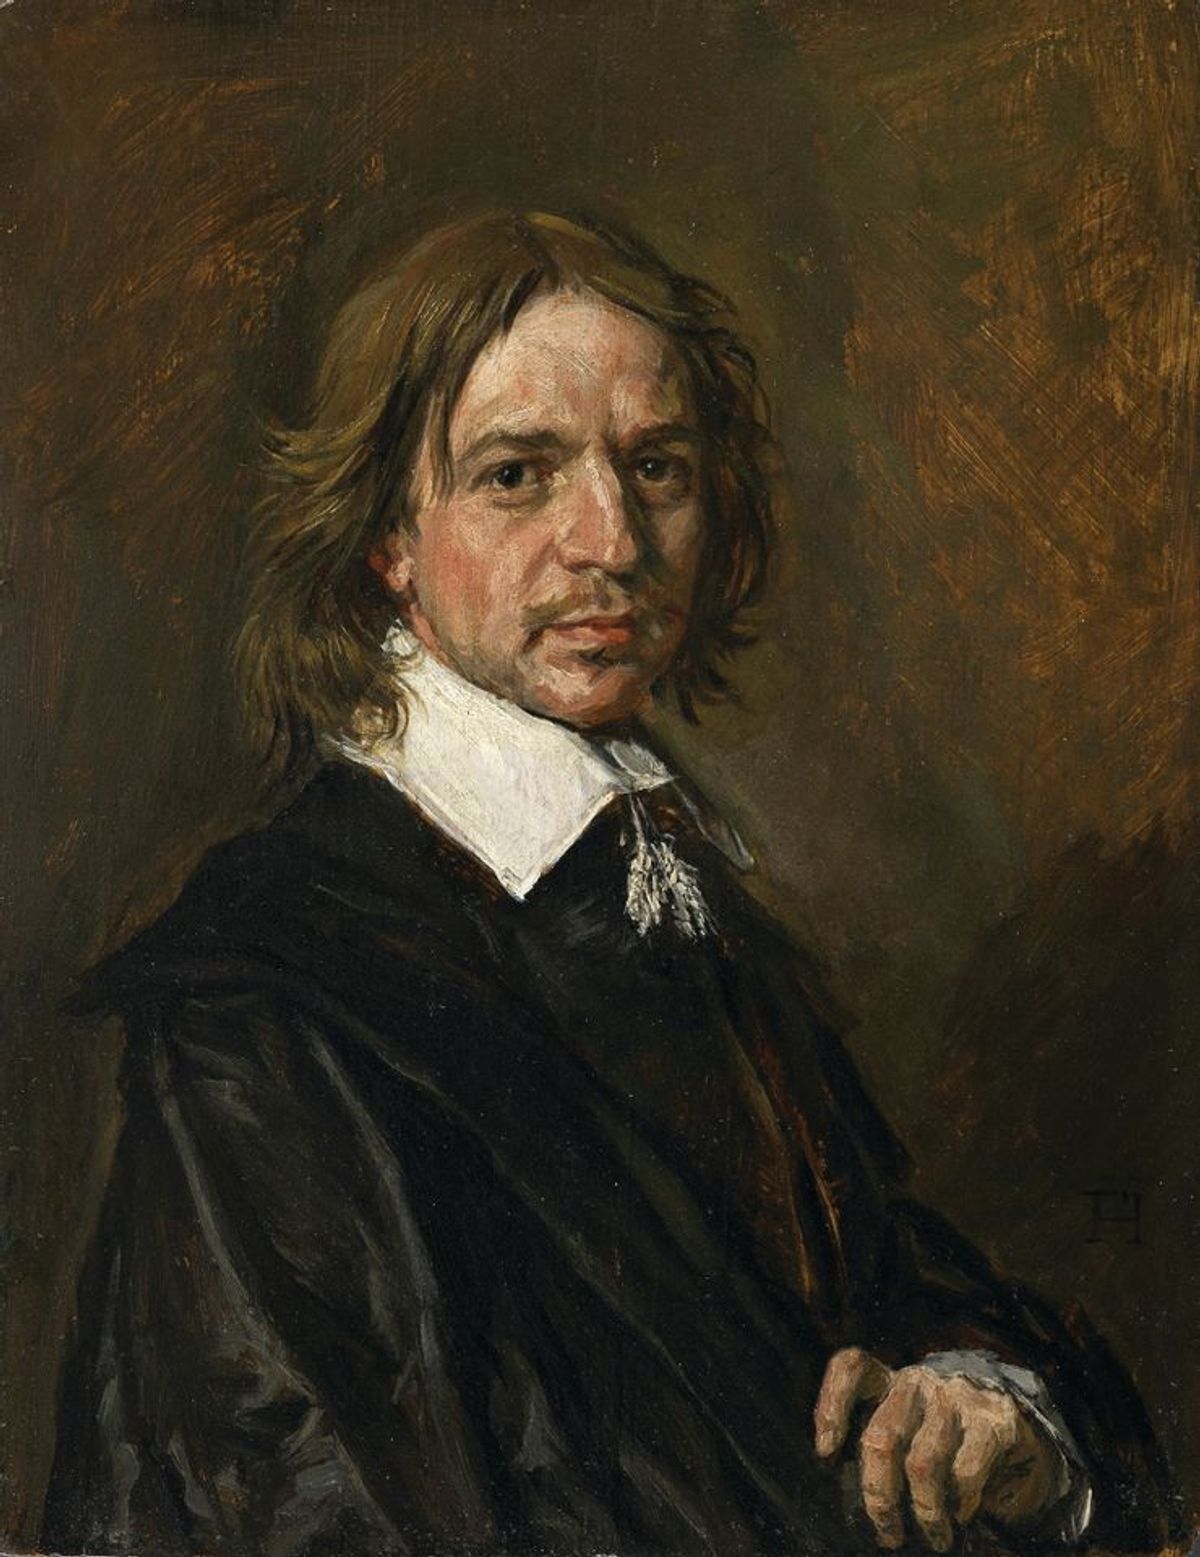 Giuliano Ruffini sold a number of Old Master paintings, including this work purportedly by Frans Hals, which sold was sold by Mark Weiss through  Sotheby's in 2011 